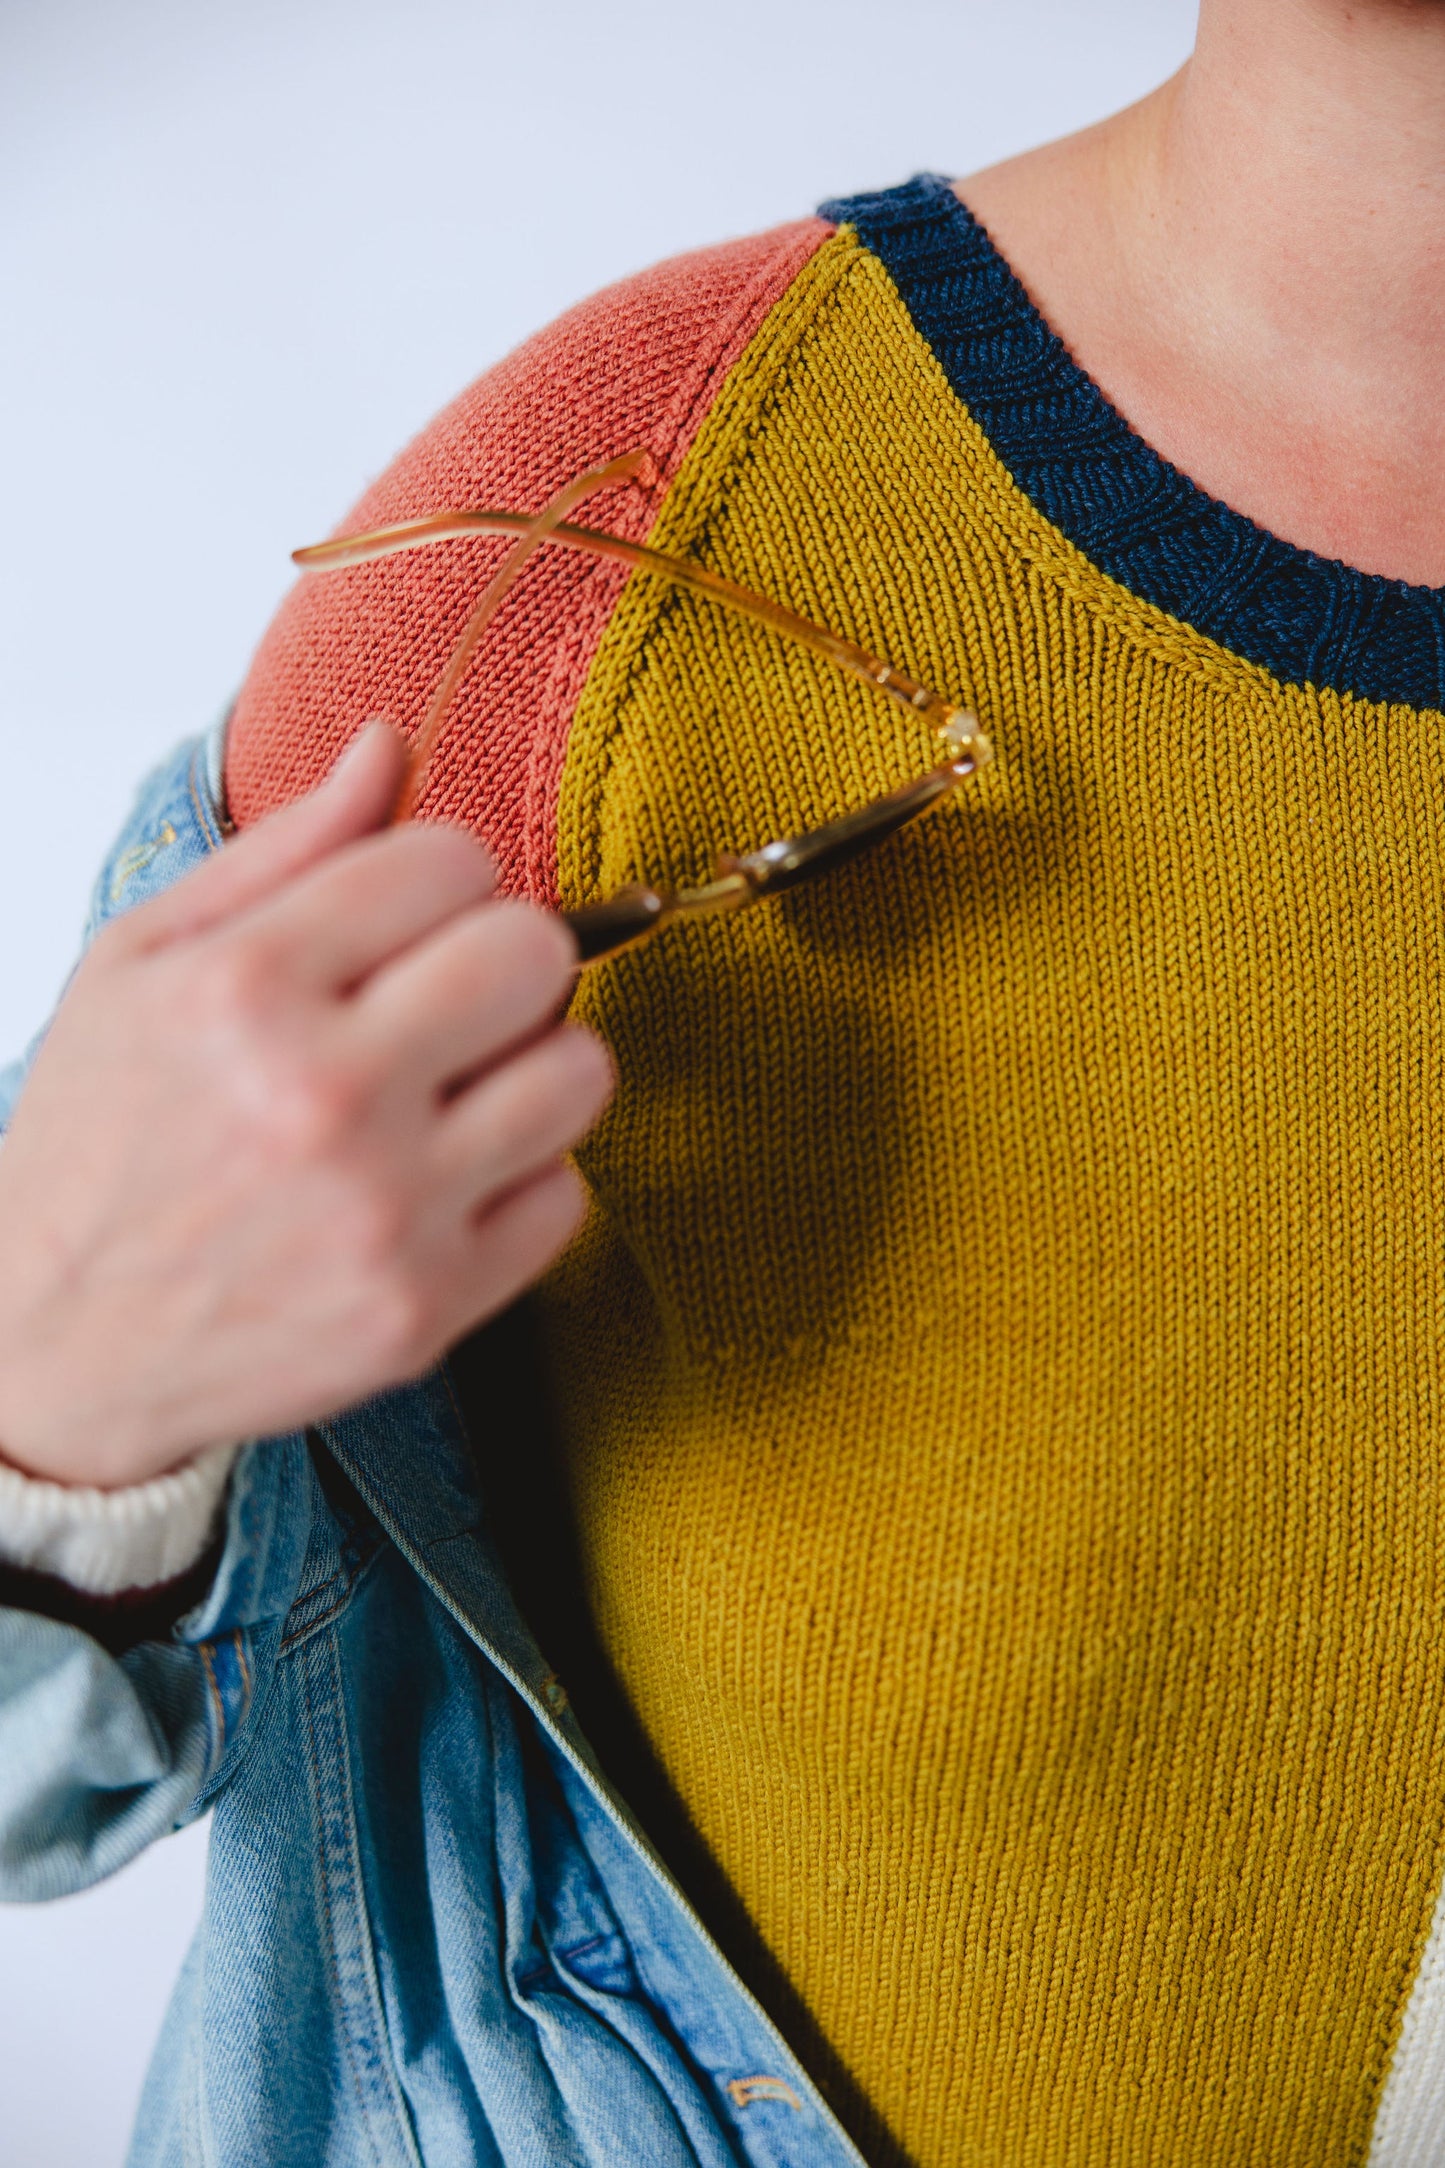 Seen close up, Jen holds a pair of sunglasses near her shoulder, in the act of removing her denim jacket. The camera focus on the details of her hand knit sweater, made up of navy blue, white, ochre, and pink color blocks.